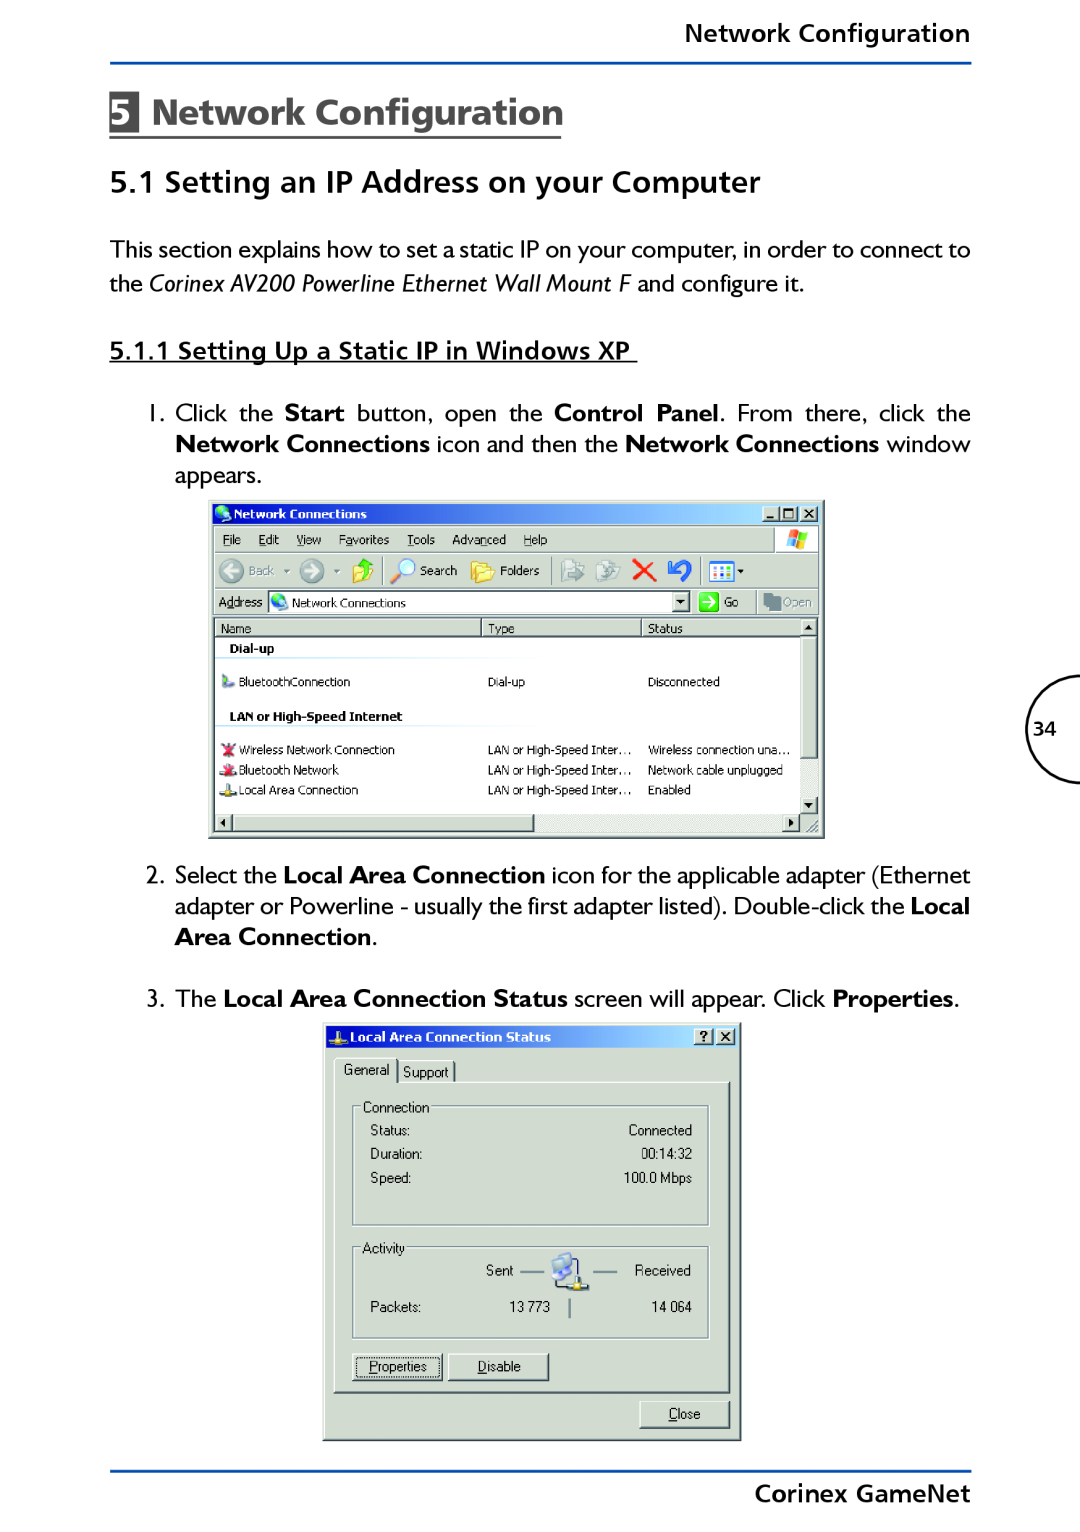 Corinex Global GameNet Network Configuration, Setting an IP Address on your Computer, Setting Up a Static IP in Windows XP 